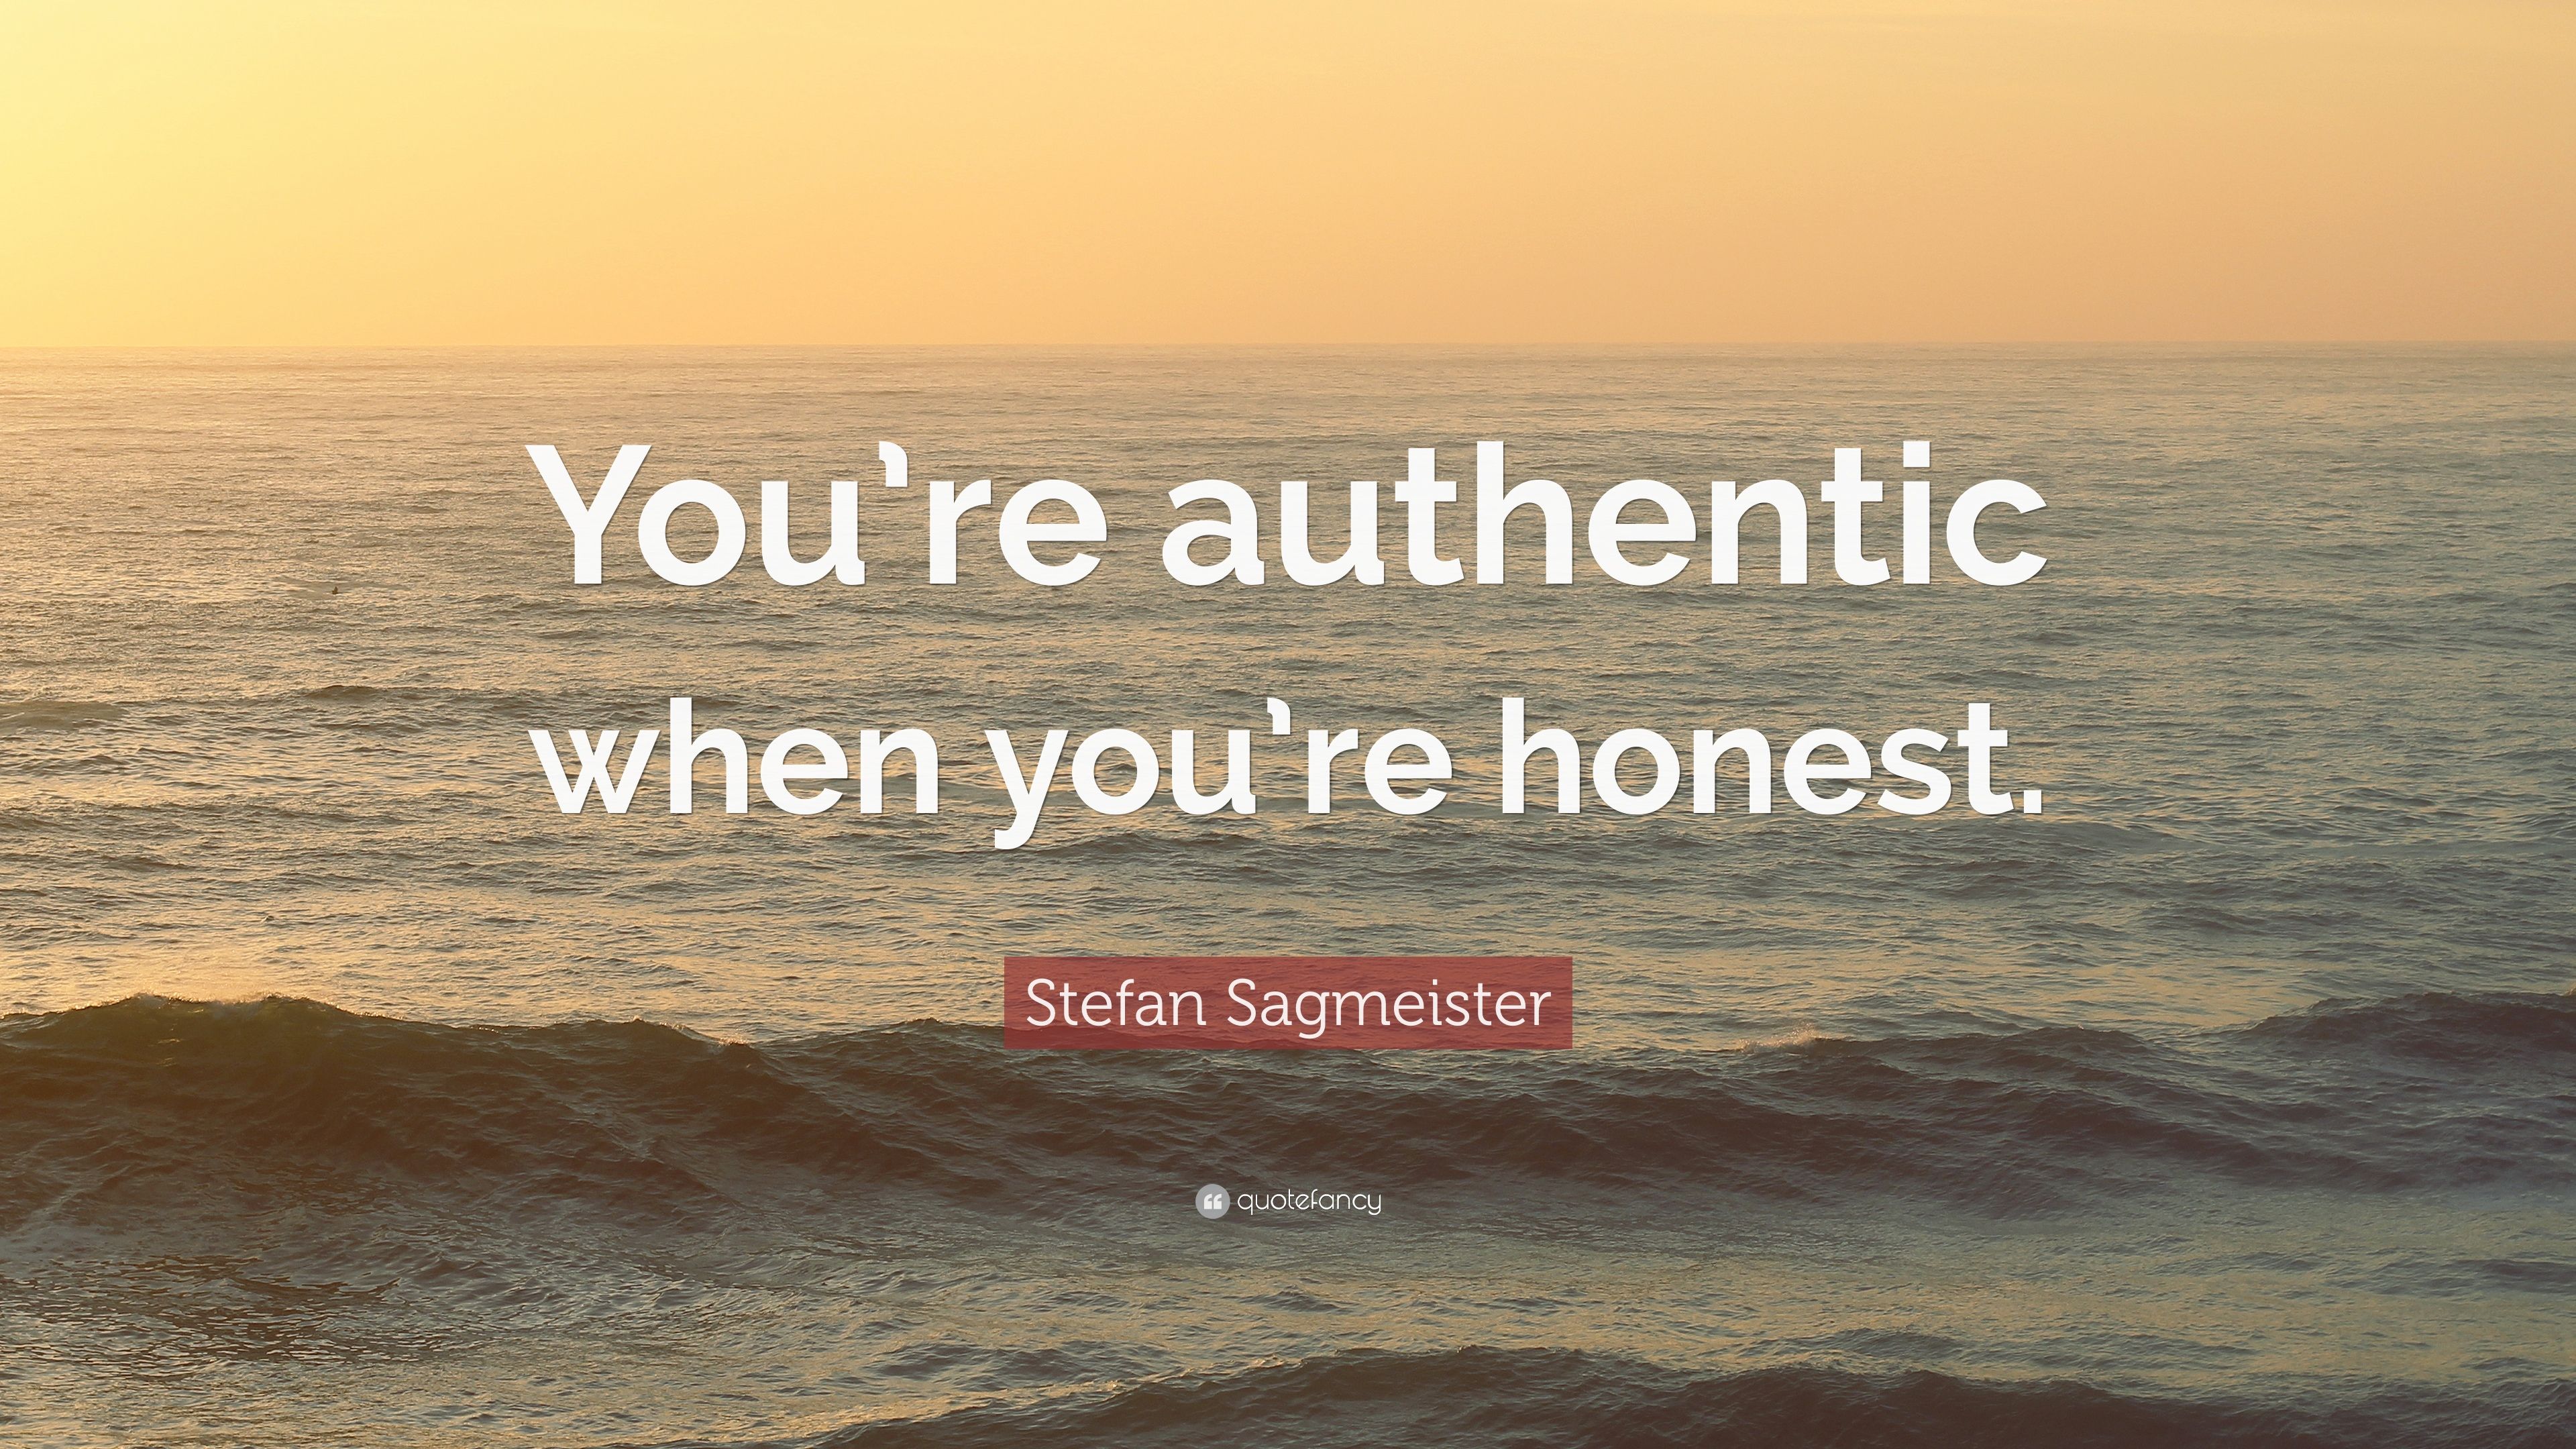 Stefan Sagmeister Quote: “You're authentic when you're honest